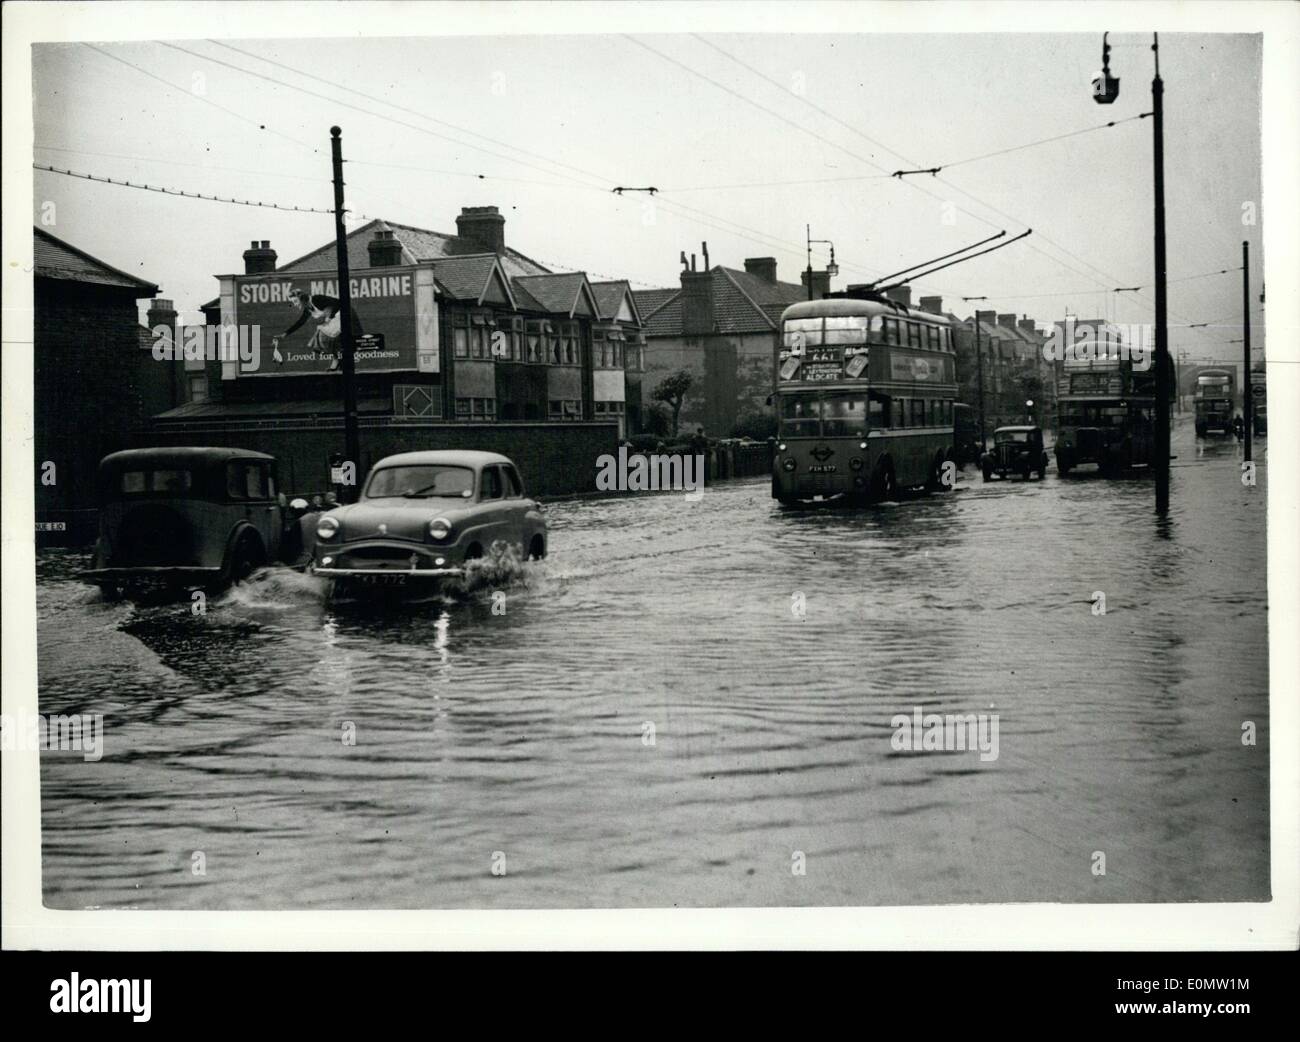 Jul. 07, 1956 - Many London Homes Hit By Lightning And Streets Flooded In Worst Thunderstorm This Year. The worst thunderstorm this year raged for hours over London and the Home Counties today. It left a trial of havoc across Southern England. Many homes were hit by lightning, and there were widespread floods. Rail, road and telephone services in the London area were disrupted, and road traffic was delayed. Photo Shows:- Typical of almost every London district today - flooded streets at Lea Bridge Road, Whipps Cross. Stock Photo